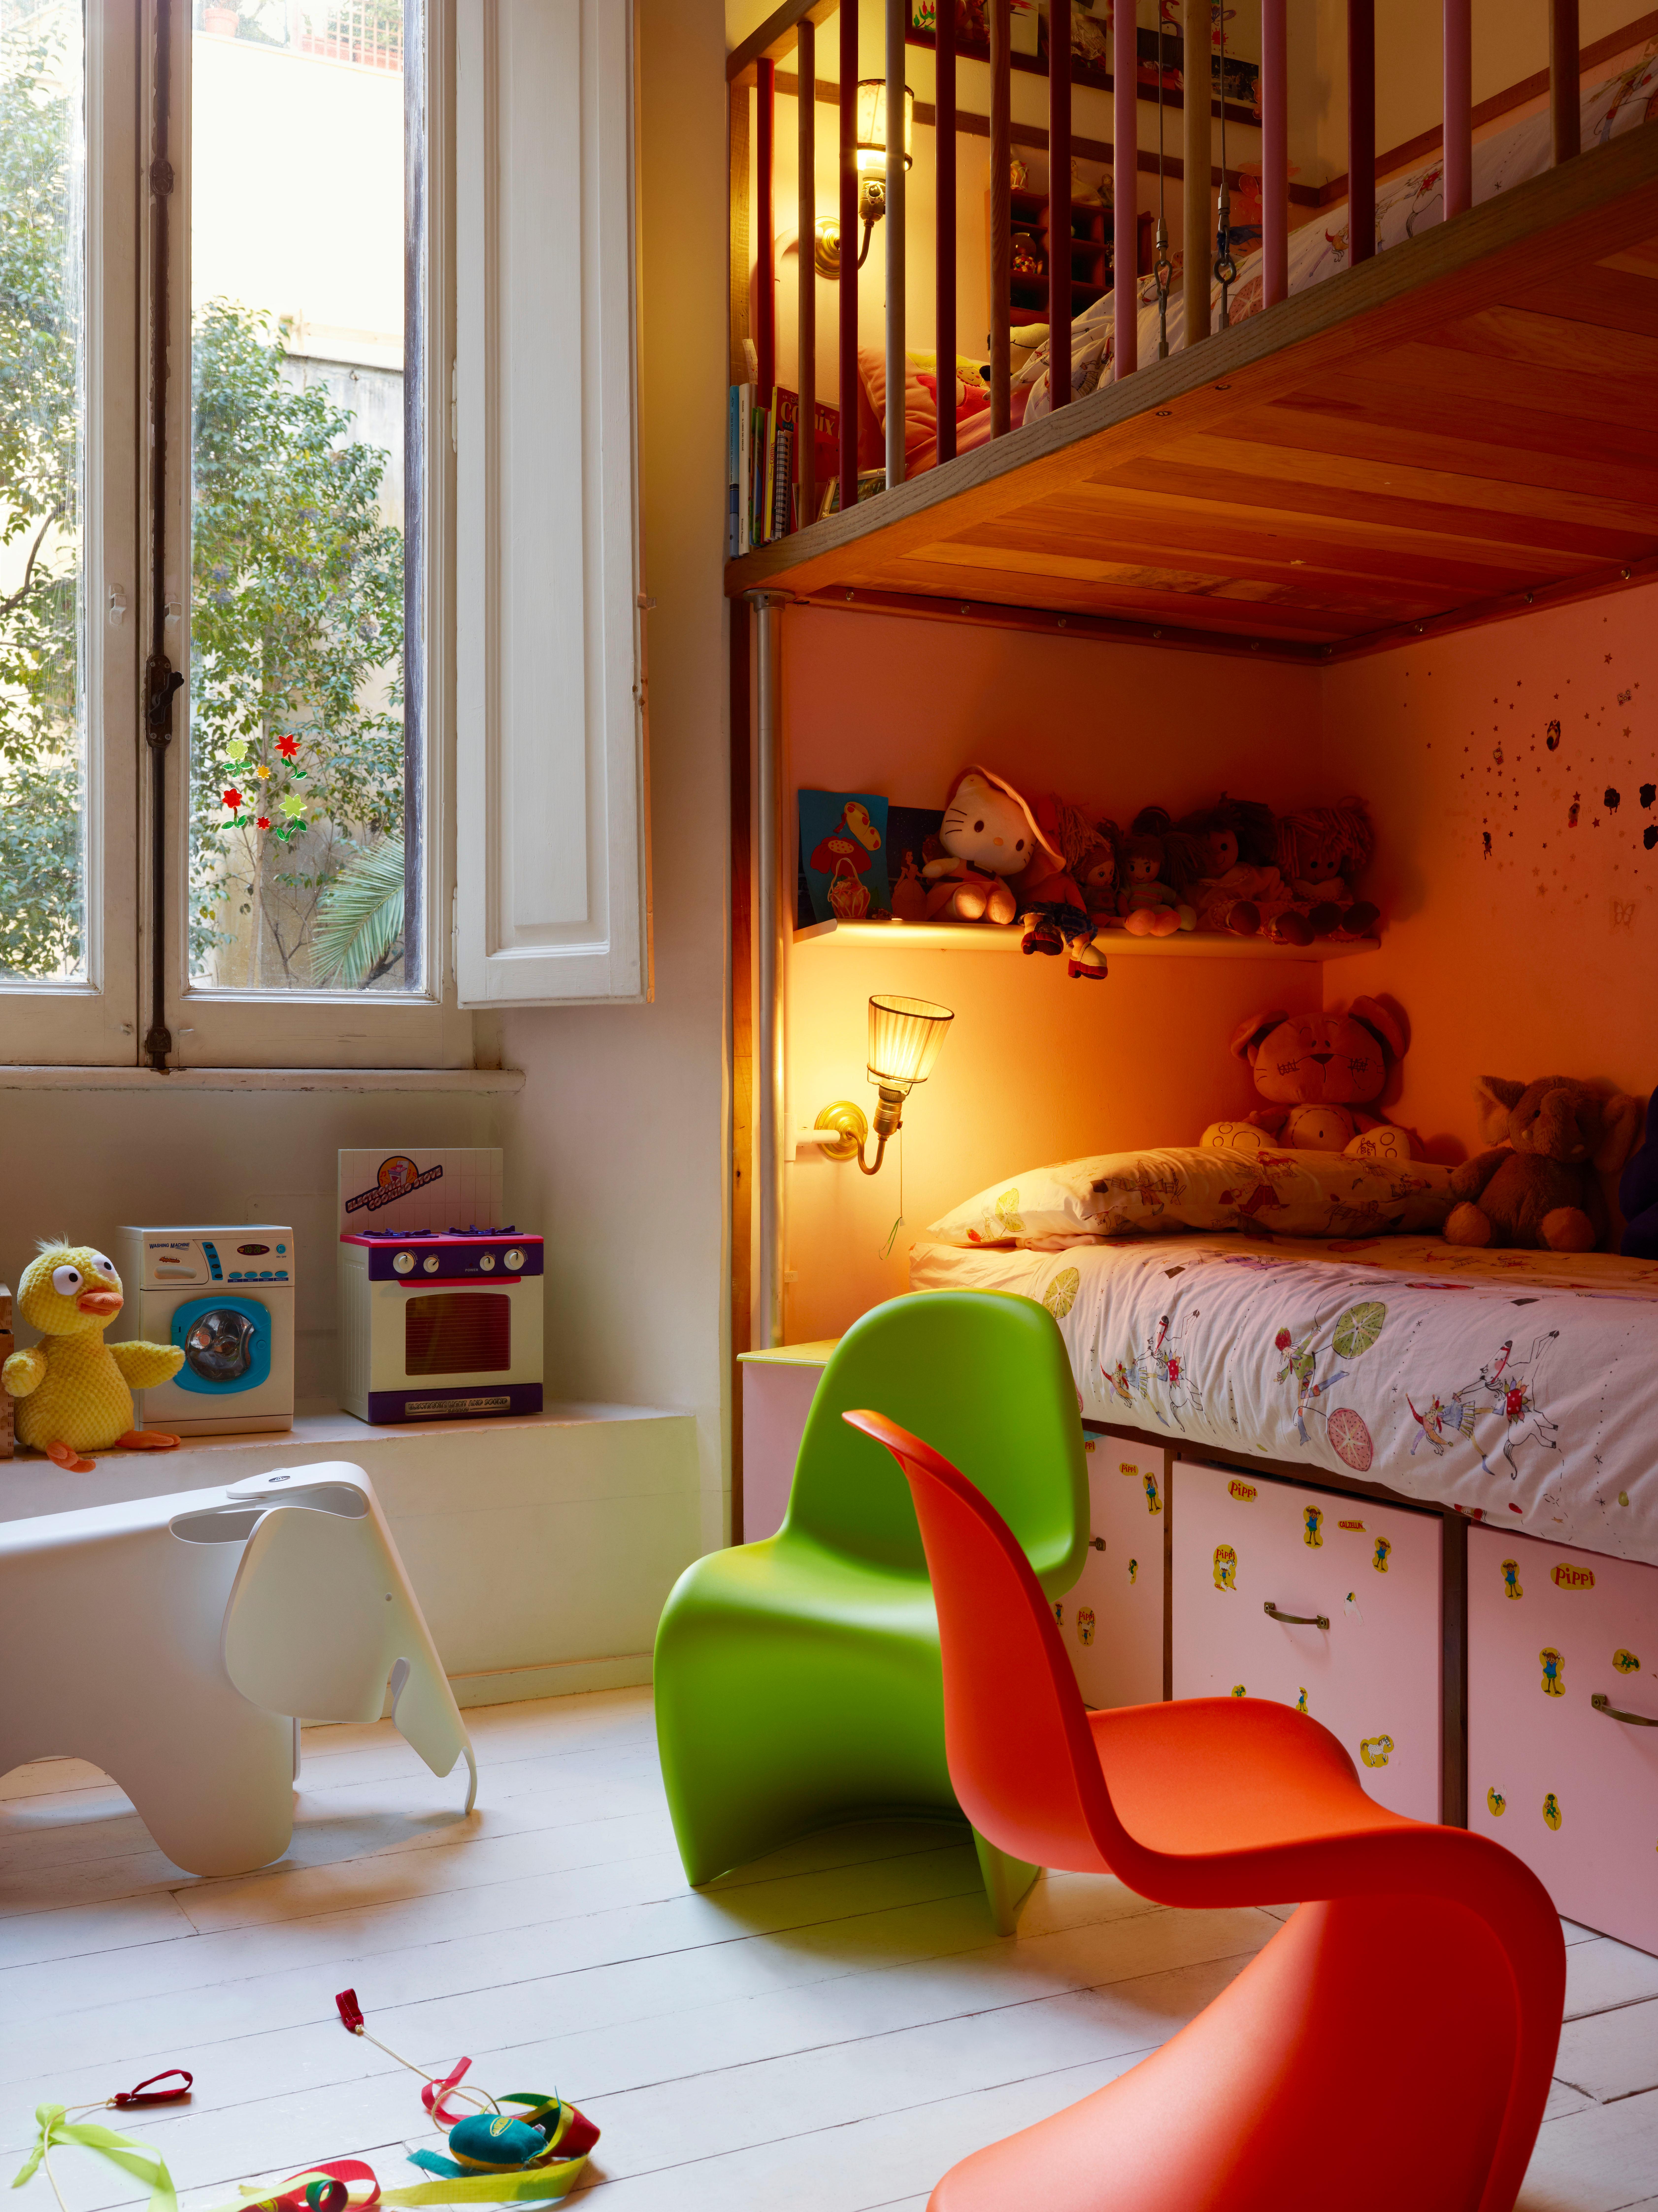 These items are currently only available in the United States.

With its bright, cheerful colors and smooth curves, the Panton chair has always been a favorite of children – both as a chair and as a plaything. This led Verner Panton to consider the